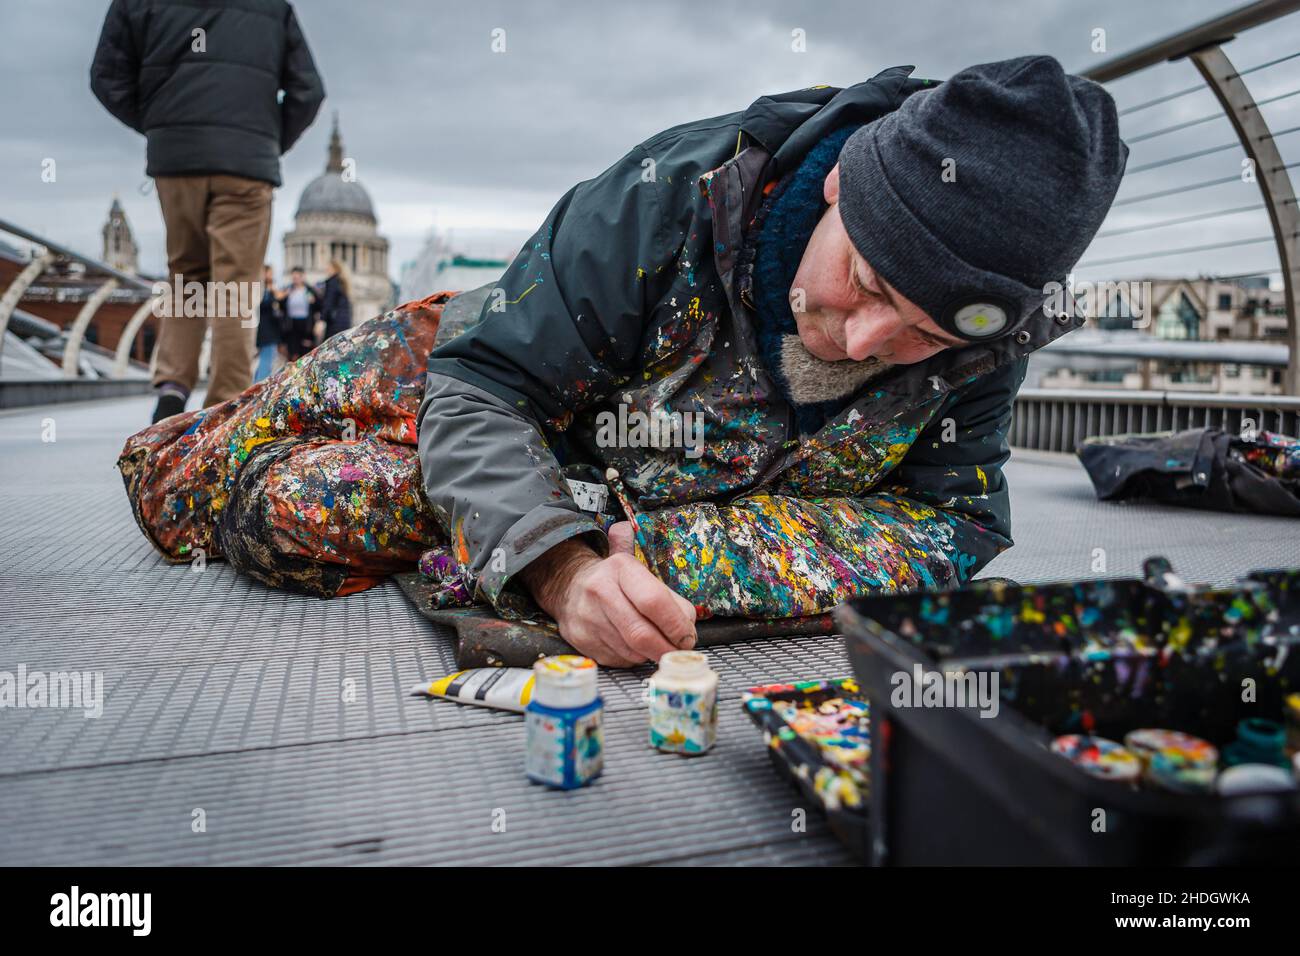 Ben Wilson AKA ‘The Chewing Gum Man’ is inspired by his distaste for any kind of rubbish on the streets. Stock Photo